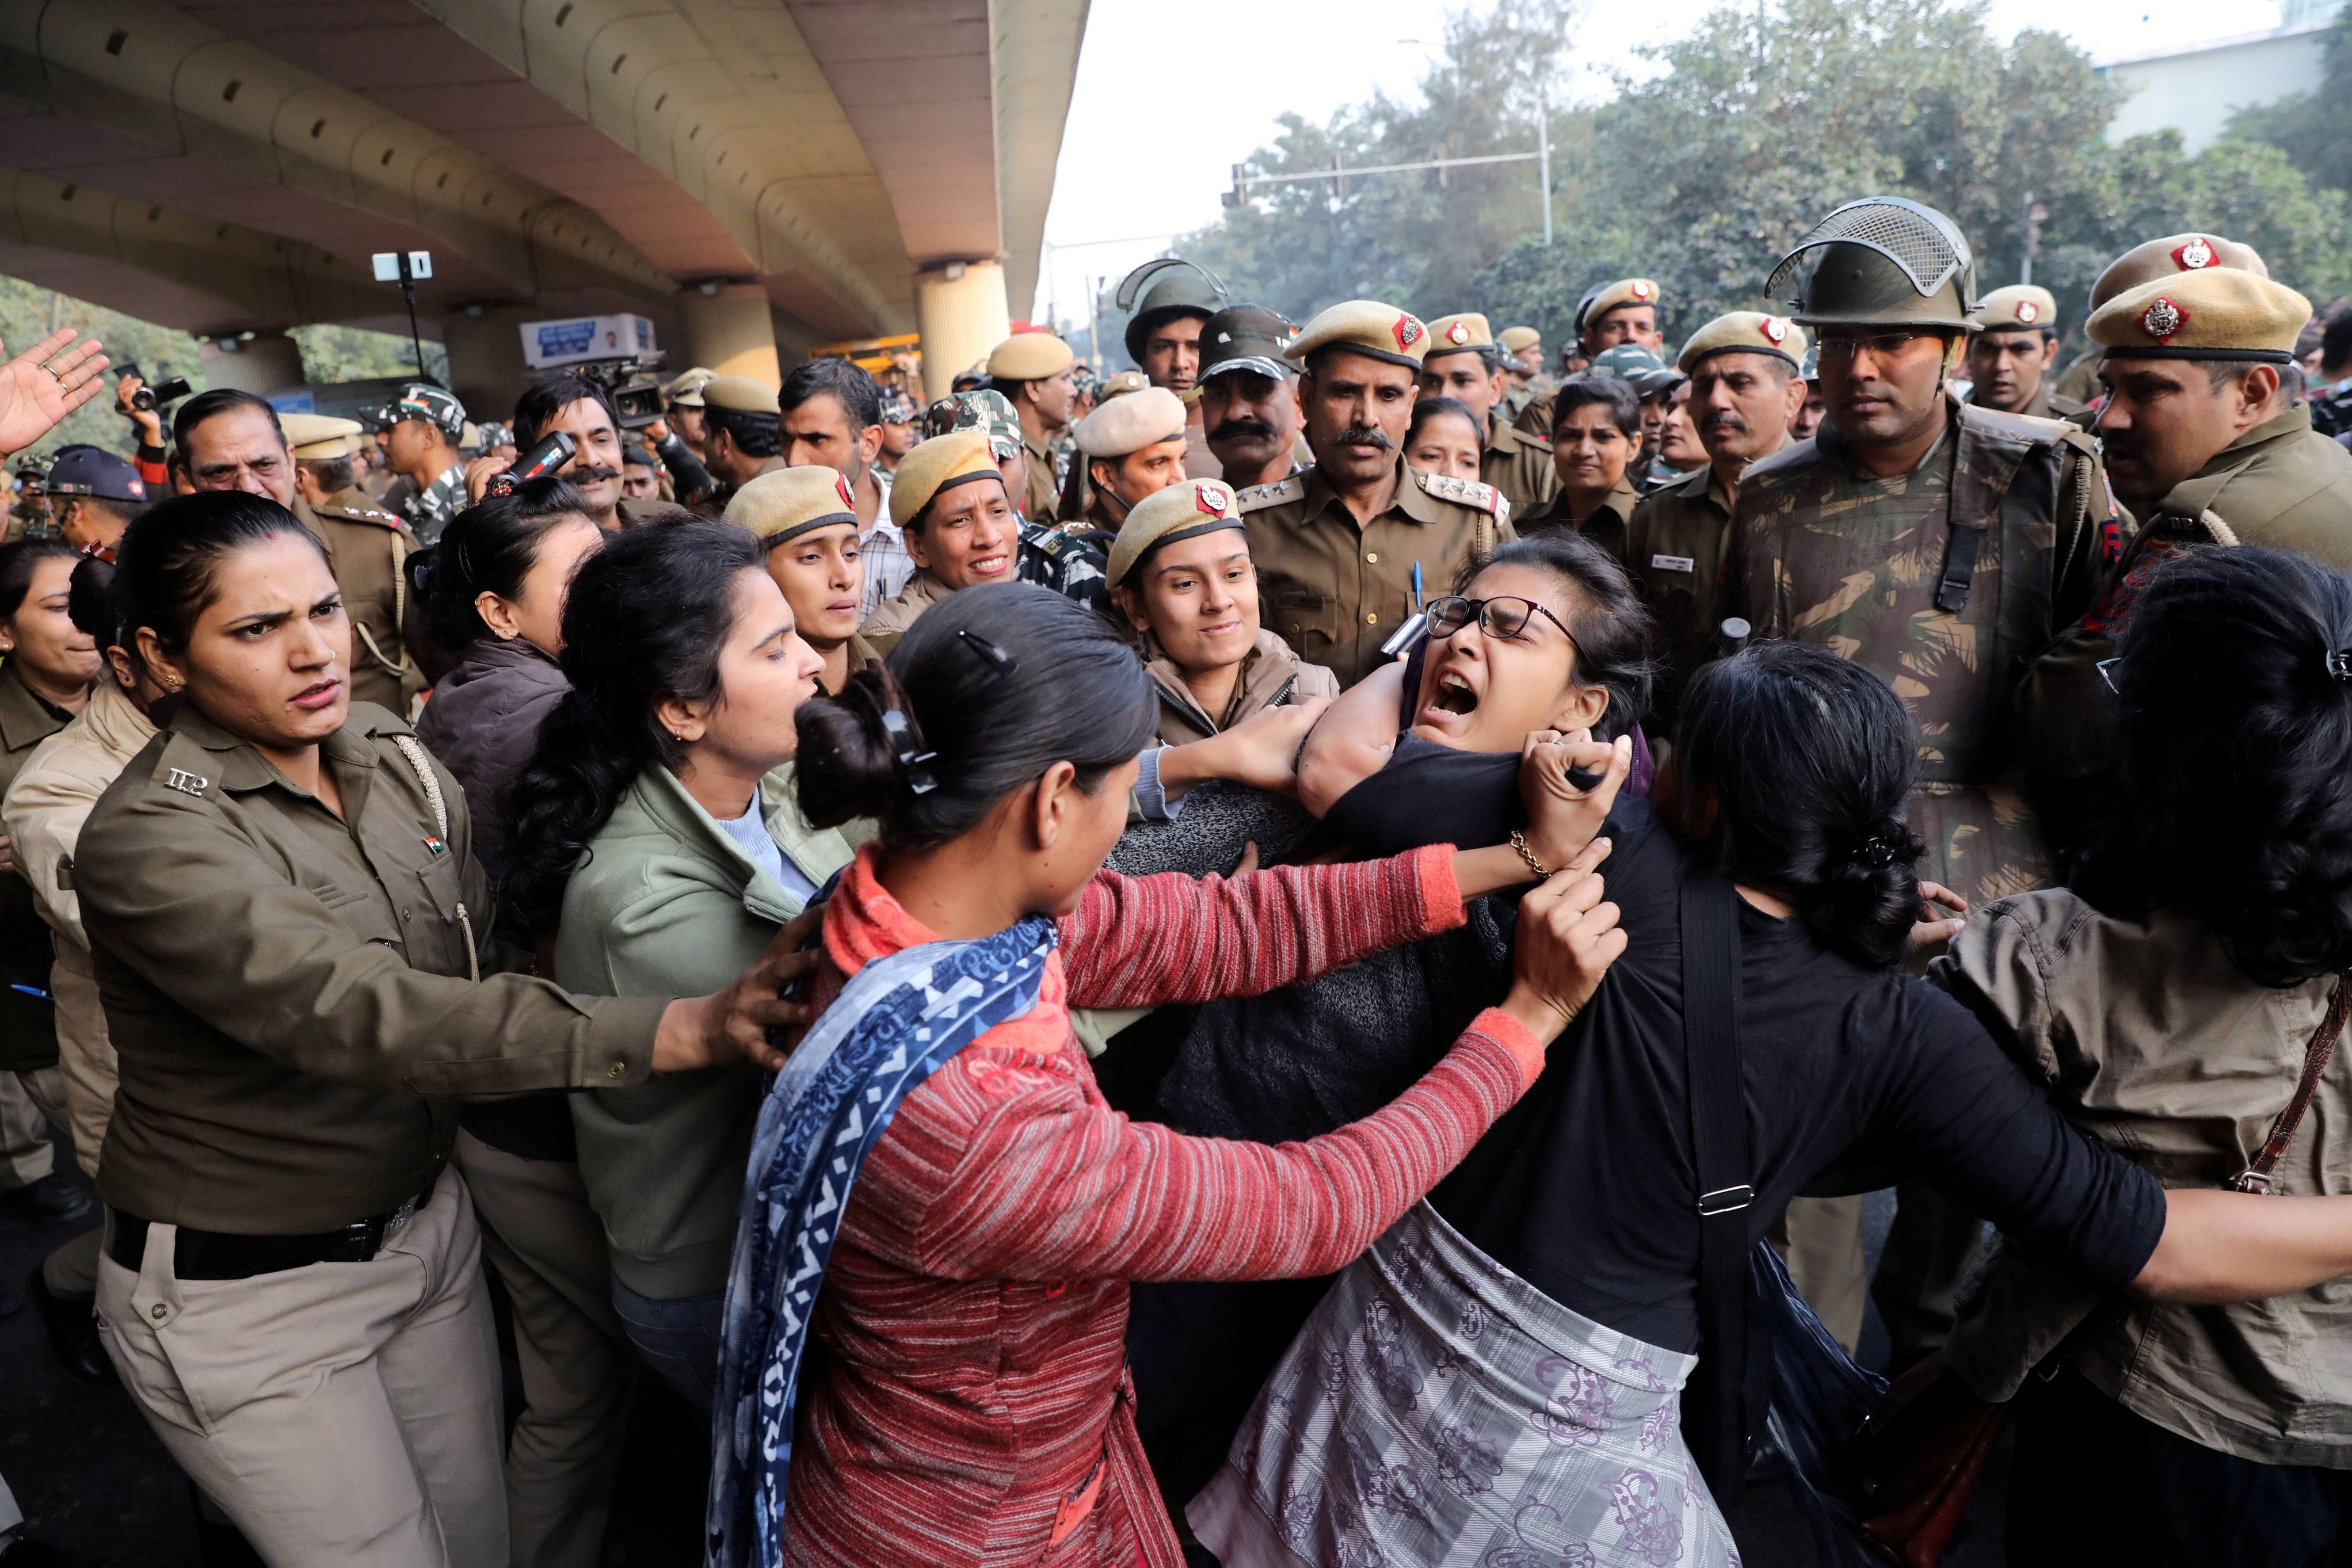 Police officers try to detain a student of Jawaharlal Nehru University (JNU) during a march to Rashtrapati Bhavan to protest against a proposed fee hike, in New Delhi. (Reuters photo)